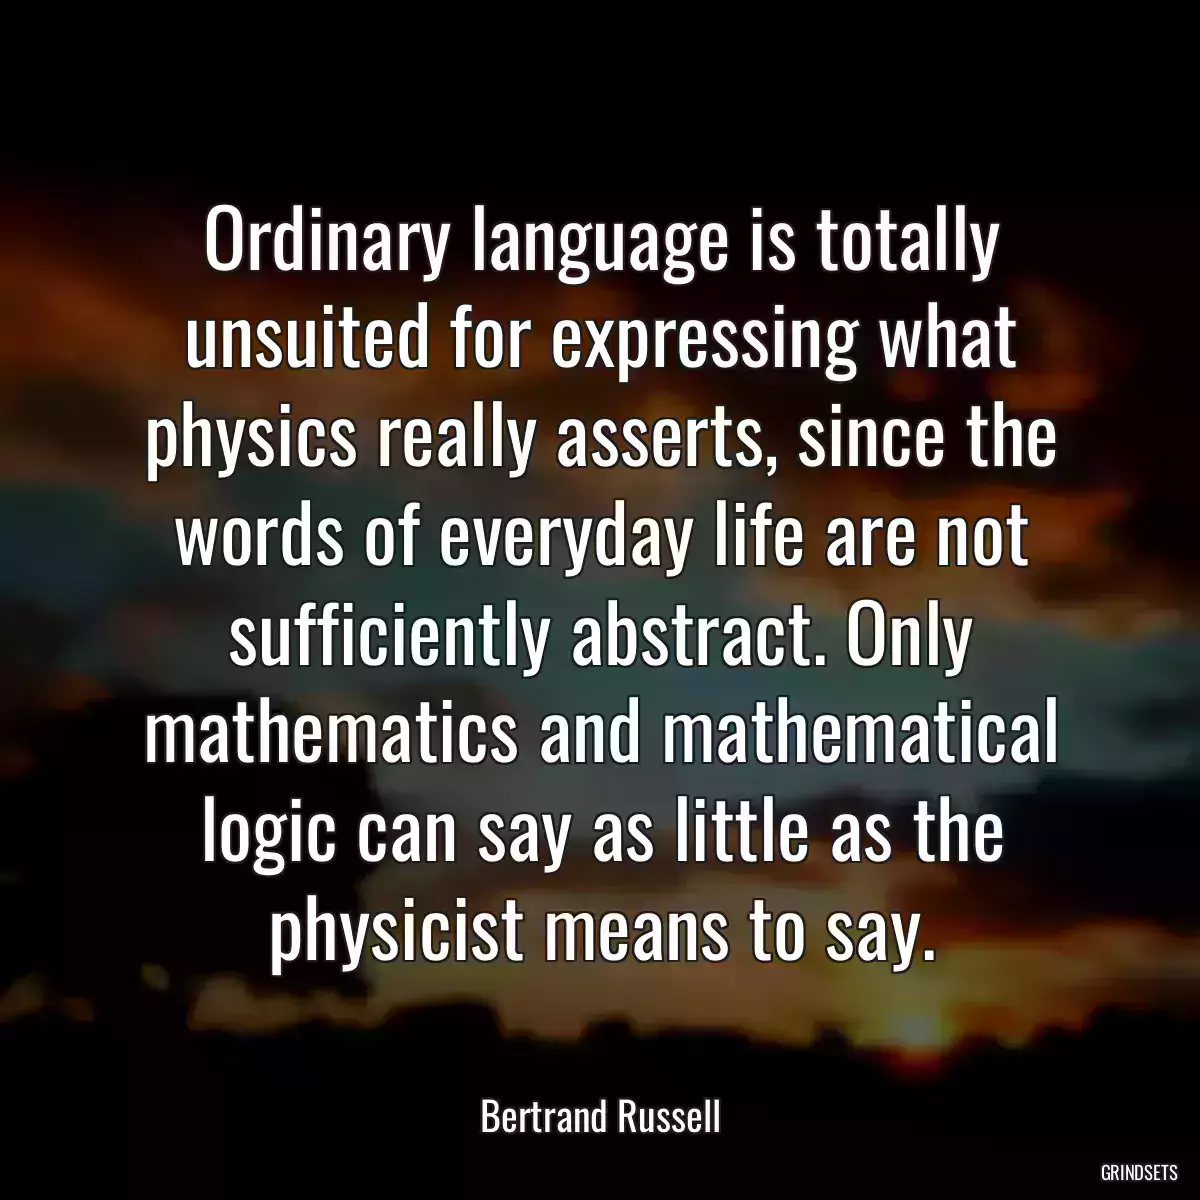 Ordinary language is totally unsuited for expressing what physics really asserts, since the words of everyday life are not sufficiently abstract. Only mathematics and mathematical logic can say as little as the physicist means to say.